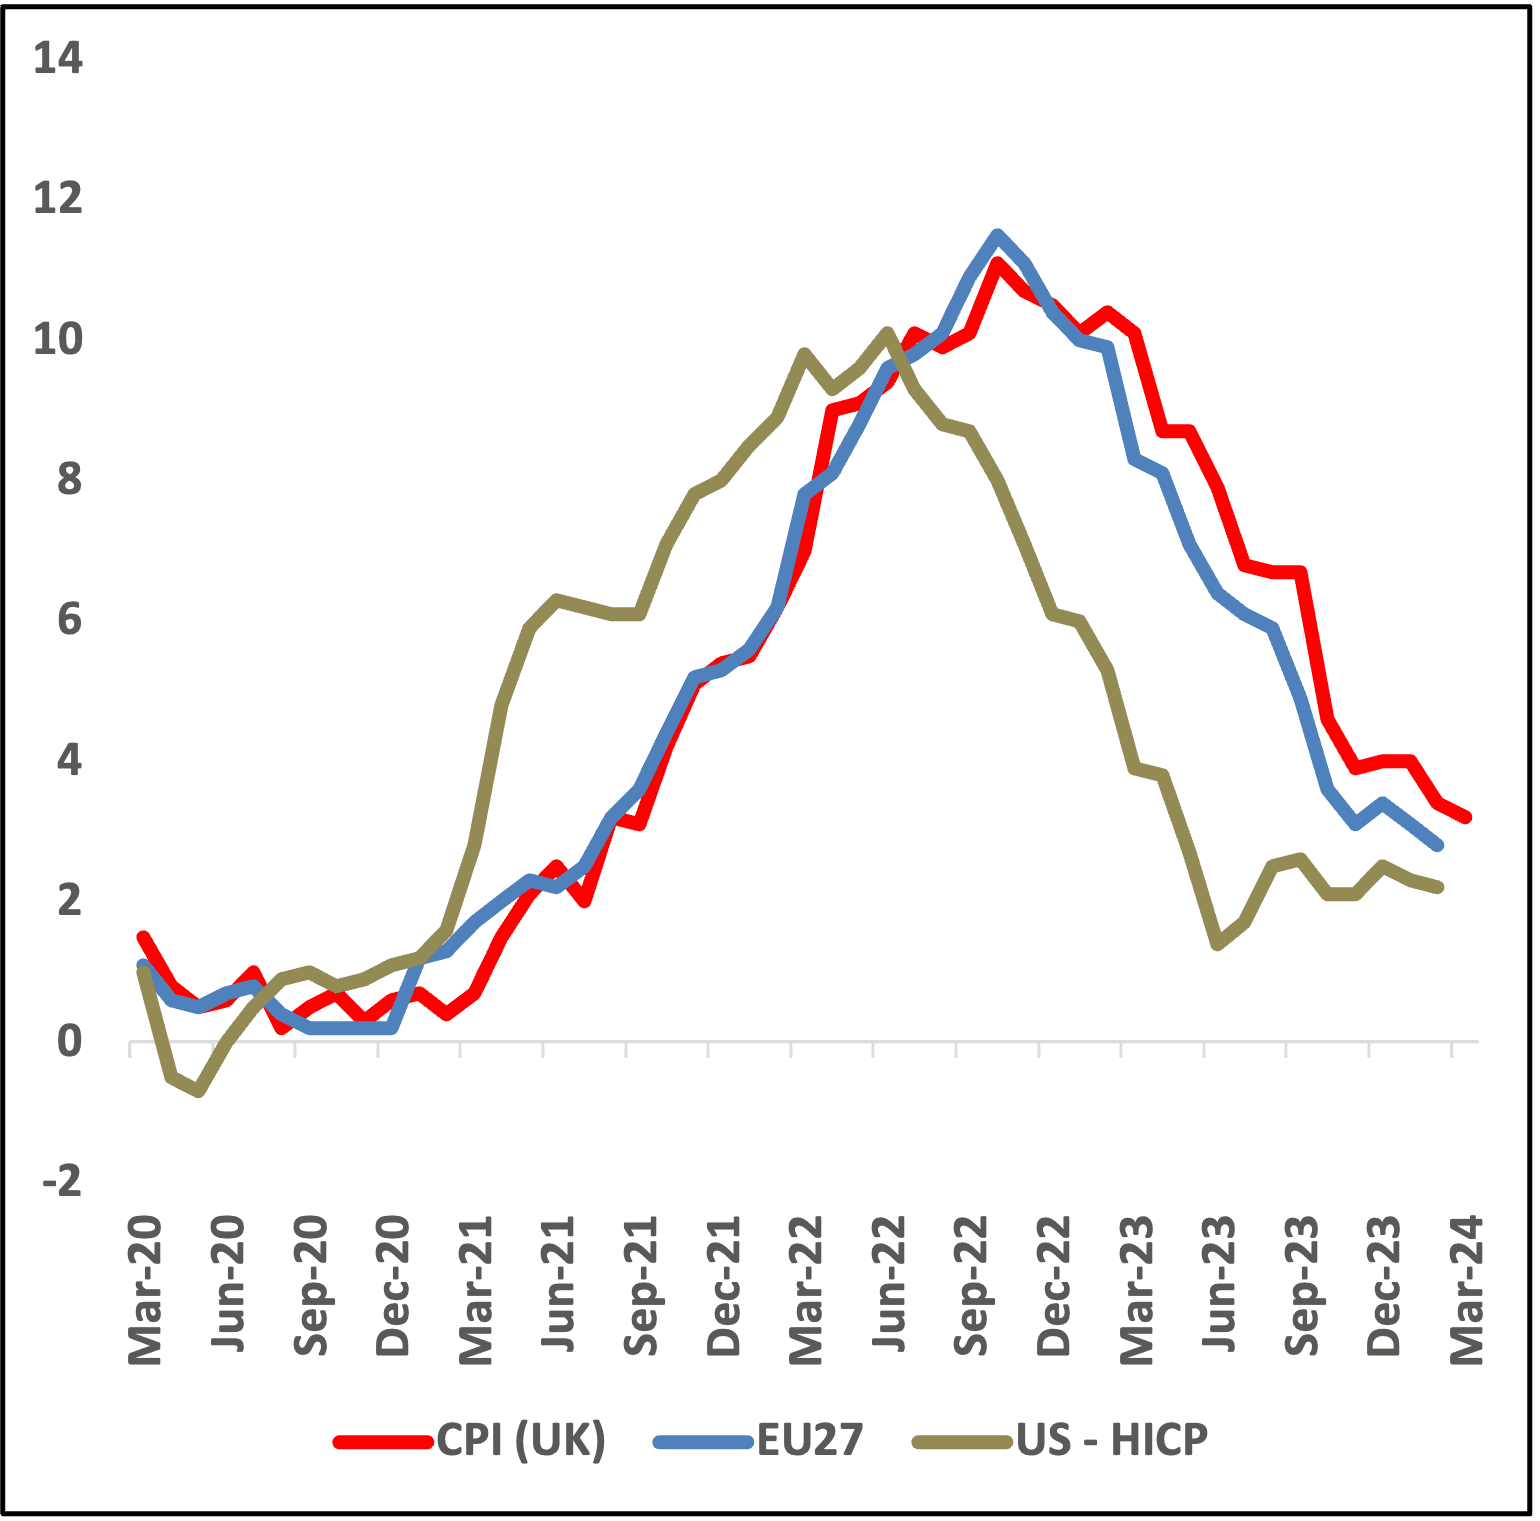 Graph showing the UK, Eurozone and US inflation rates since March 2020. Showing that the US's inflation rate started to fall from its peak earlier than the EU and the UK, with the UK's remaining elevated compared to the rest.